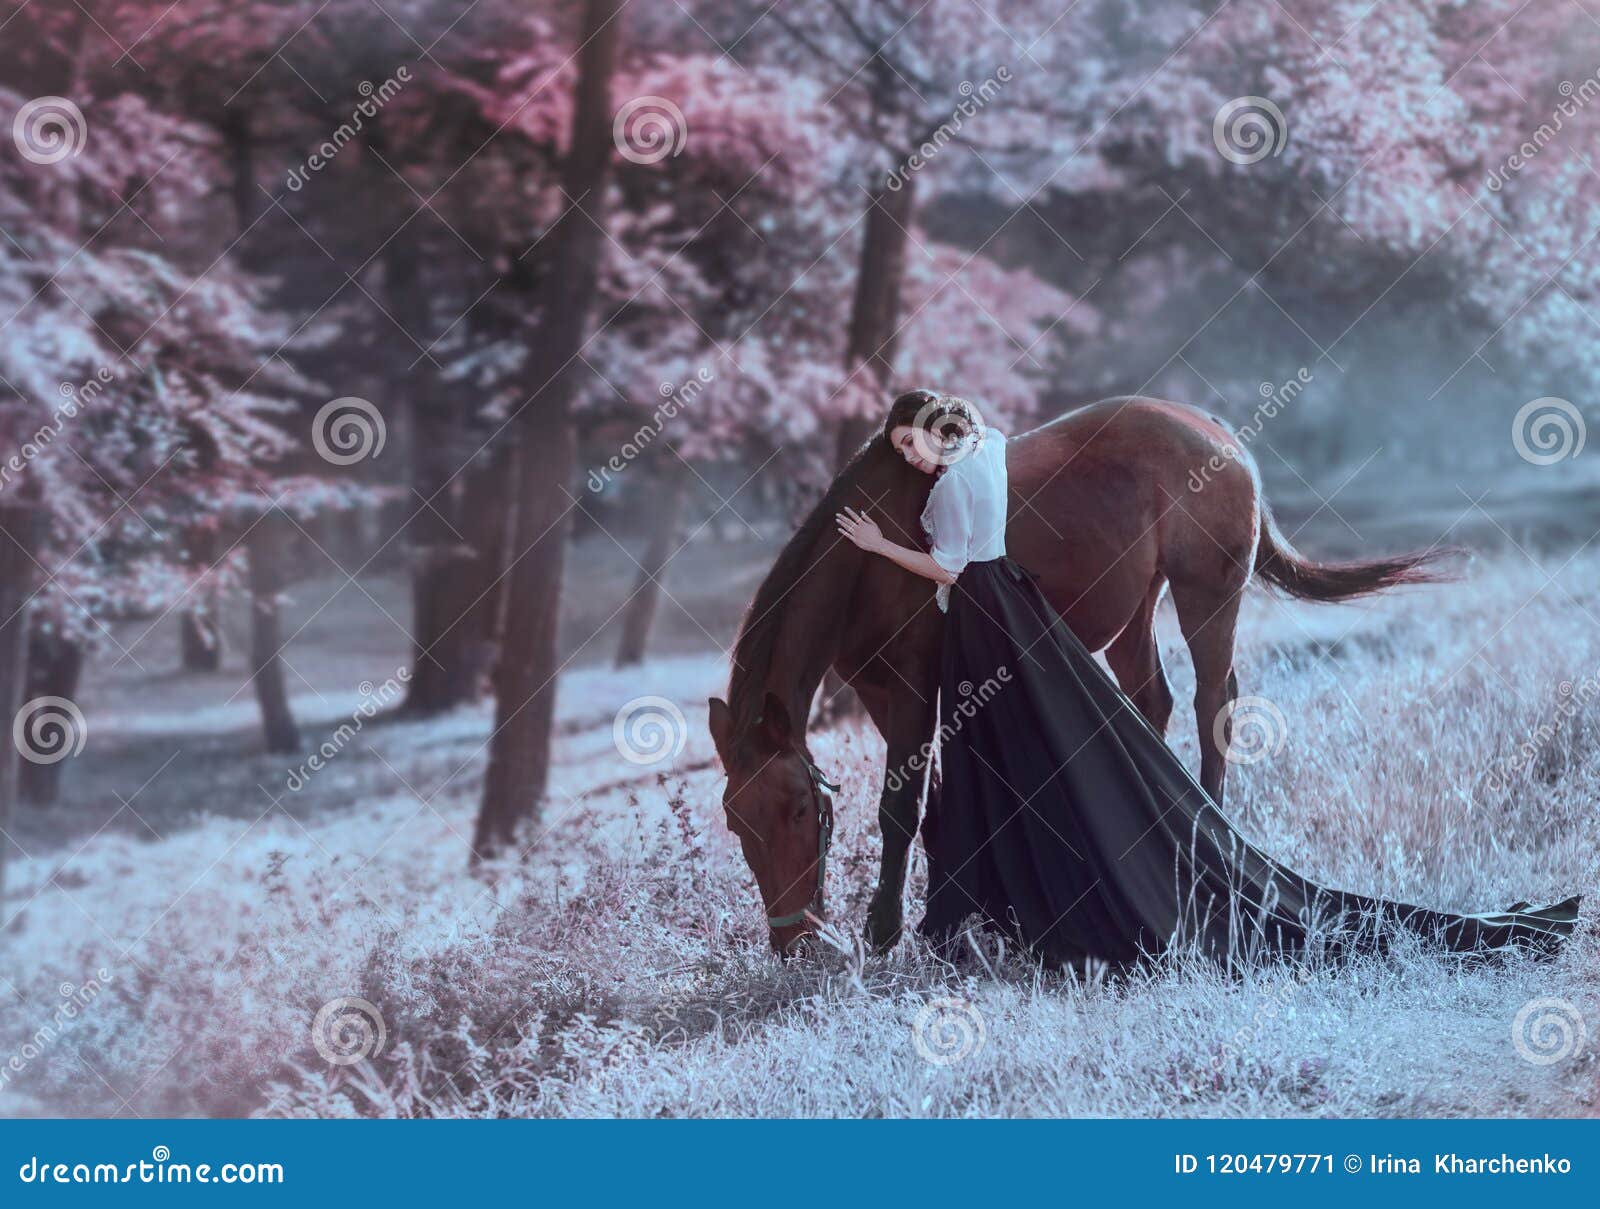 a young princess in a vintage dress with a long train, with tenderness and love, hugs her horse. the brunette girl in a